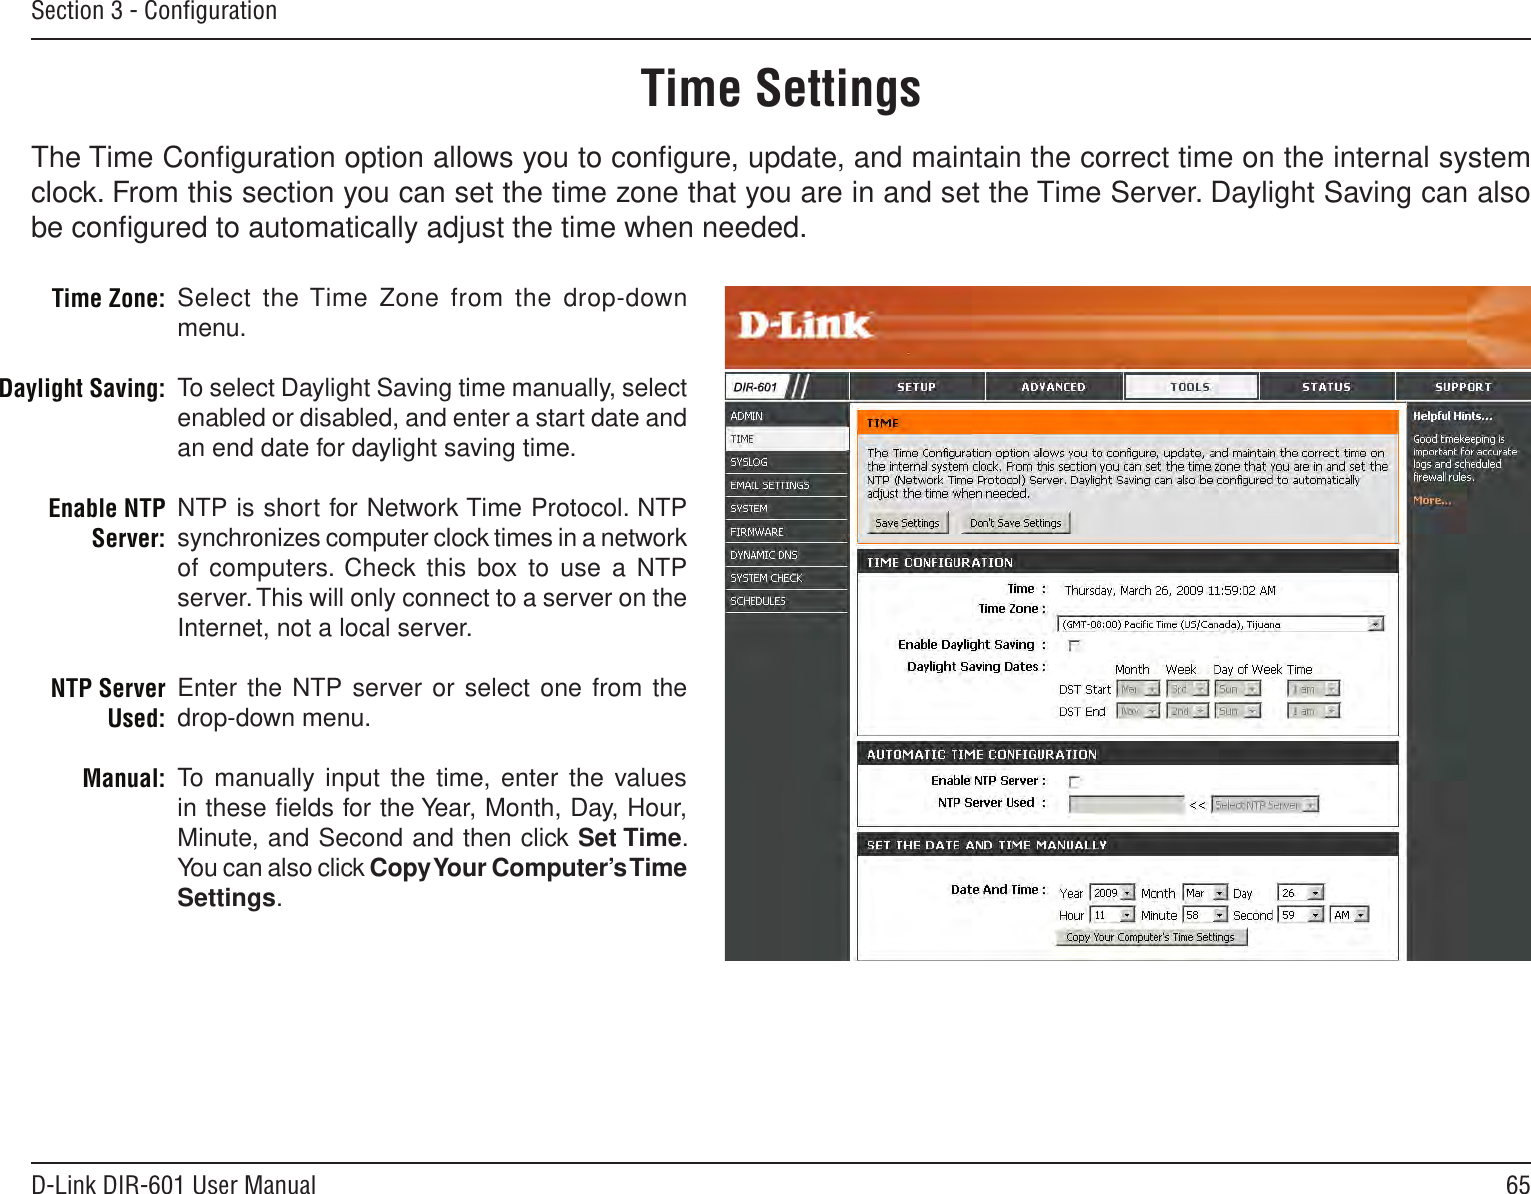 65D-Link DIR-601 User ManualSection 3 - ConﬁgurationTime SettingsSelect the Time Zone from  the drop-down menu.To select Daylight Saving time manually, select enabled or disabled, and enter a start date and an end date for daylight saving time.NTP is short for Network Time Protocol. NTP synchronizes computer clock times in a network of computers.  Check this box to use a NTP server. This will only connect to a server on the Internet, not a local server.Enter the NTP server or select one from the drop-down menu.To manually input  the time, enter the values in these ﬁelds for the Year, Month, Day, Hour, Minute, and Second and then click Set Time. You can also click Copy Your Computer’s Time Settings.Time Zone:Daylight Saving:Enable NTP Server:NTP Server Used:Manual:The Time Conﬁguration option allows you to conﬁgure, update, and maintain the correct time on the internal system clock. From this section you can set the time zone that you are in and set the Time Server. Daylight Saving can also be conﬁgured to automatically adjust the time when needed.